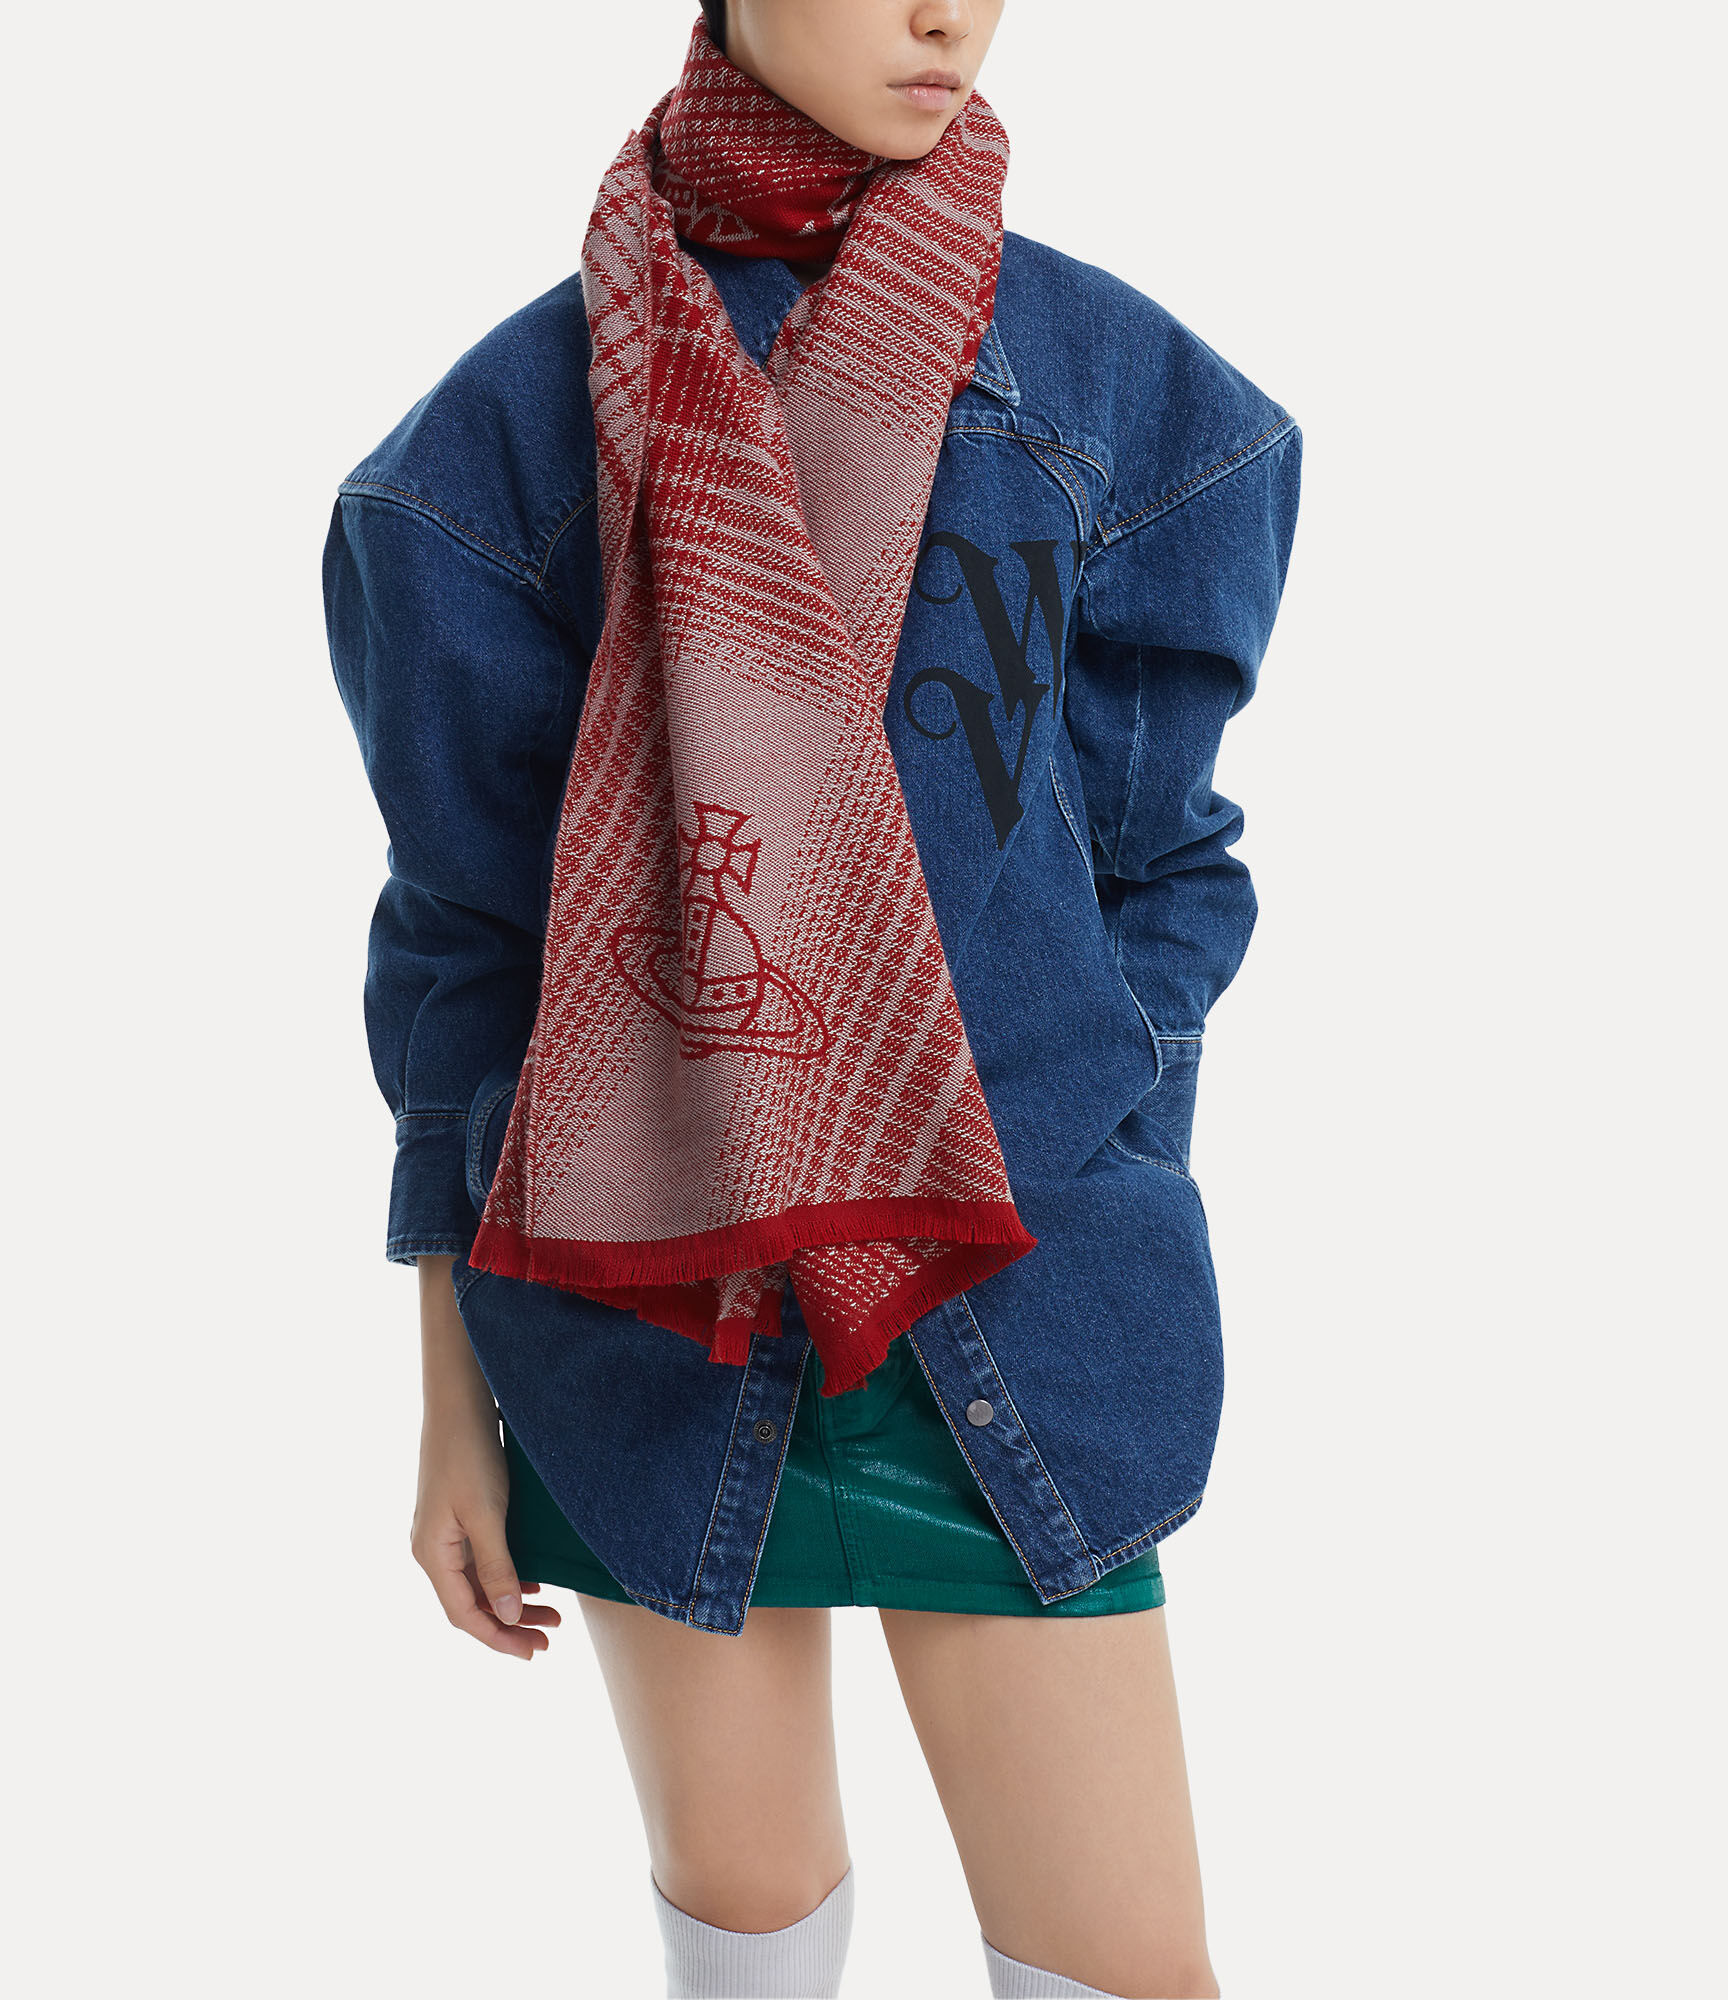 Madras Check Scarf in RED | Vivienne Westwood®